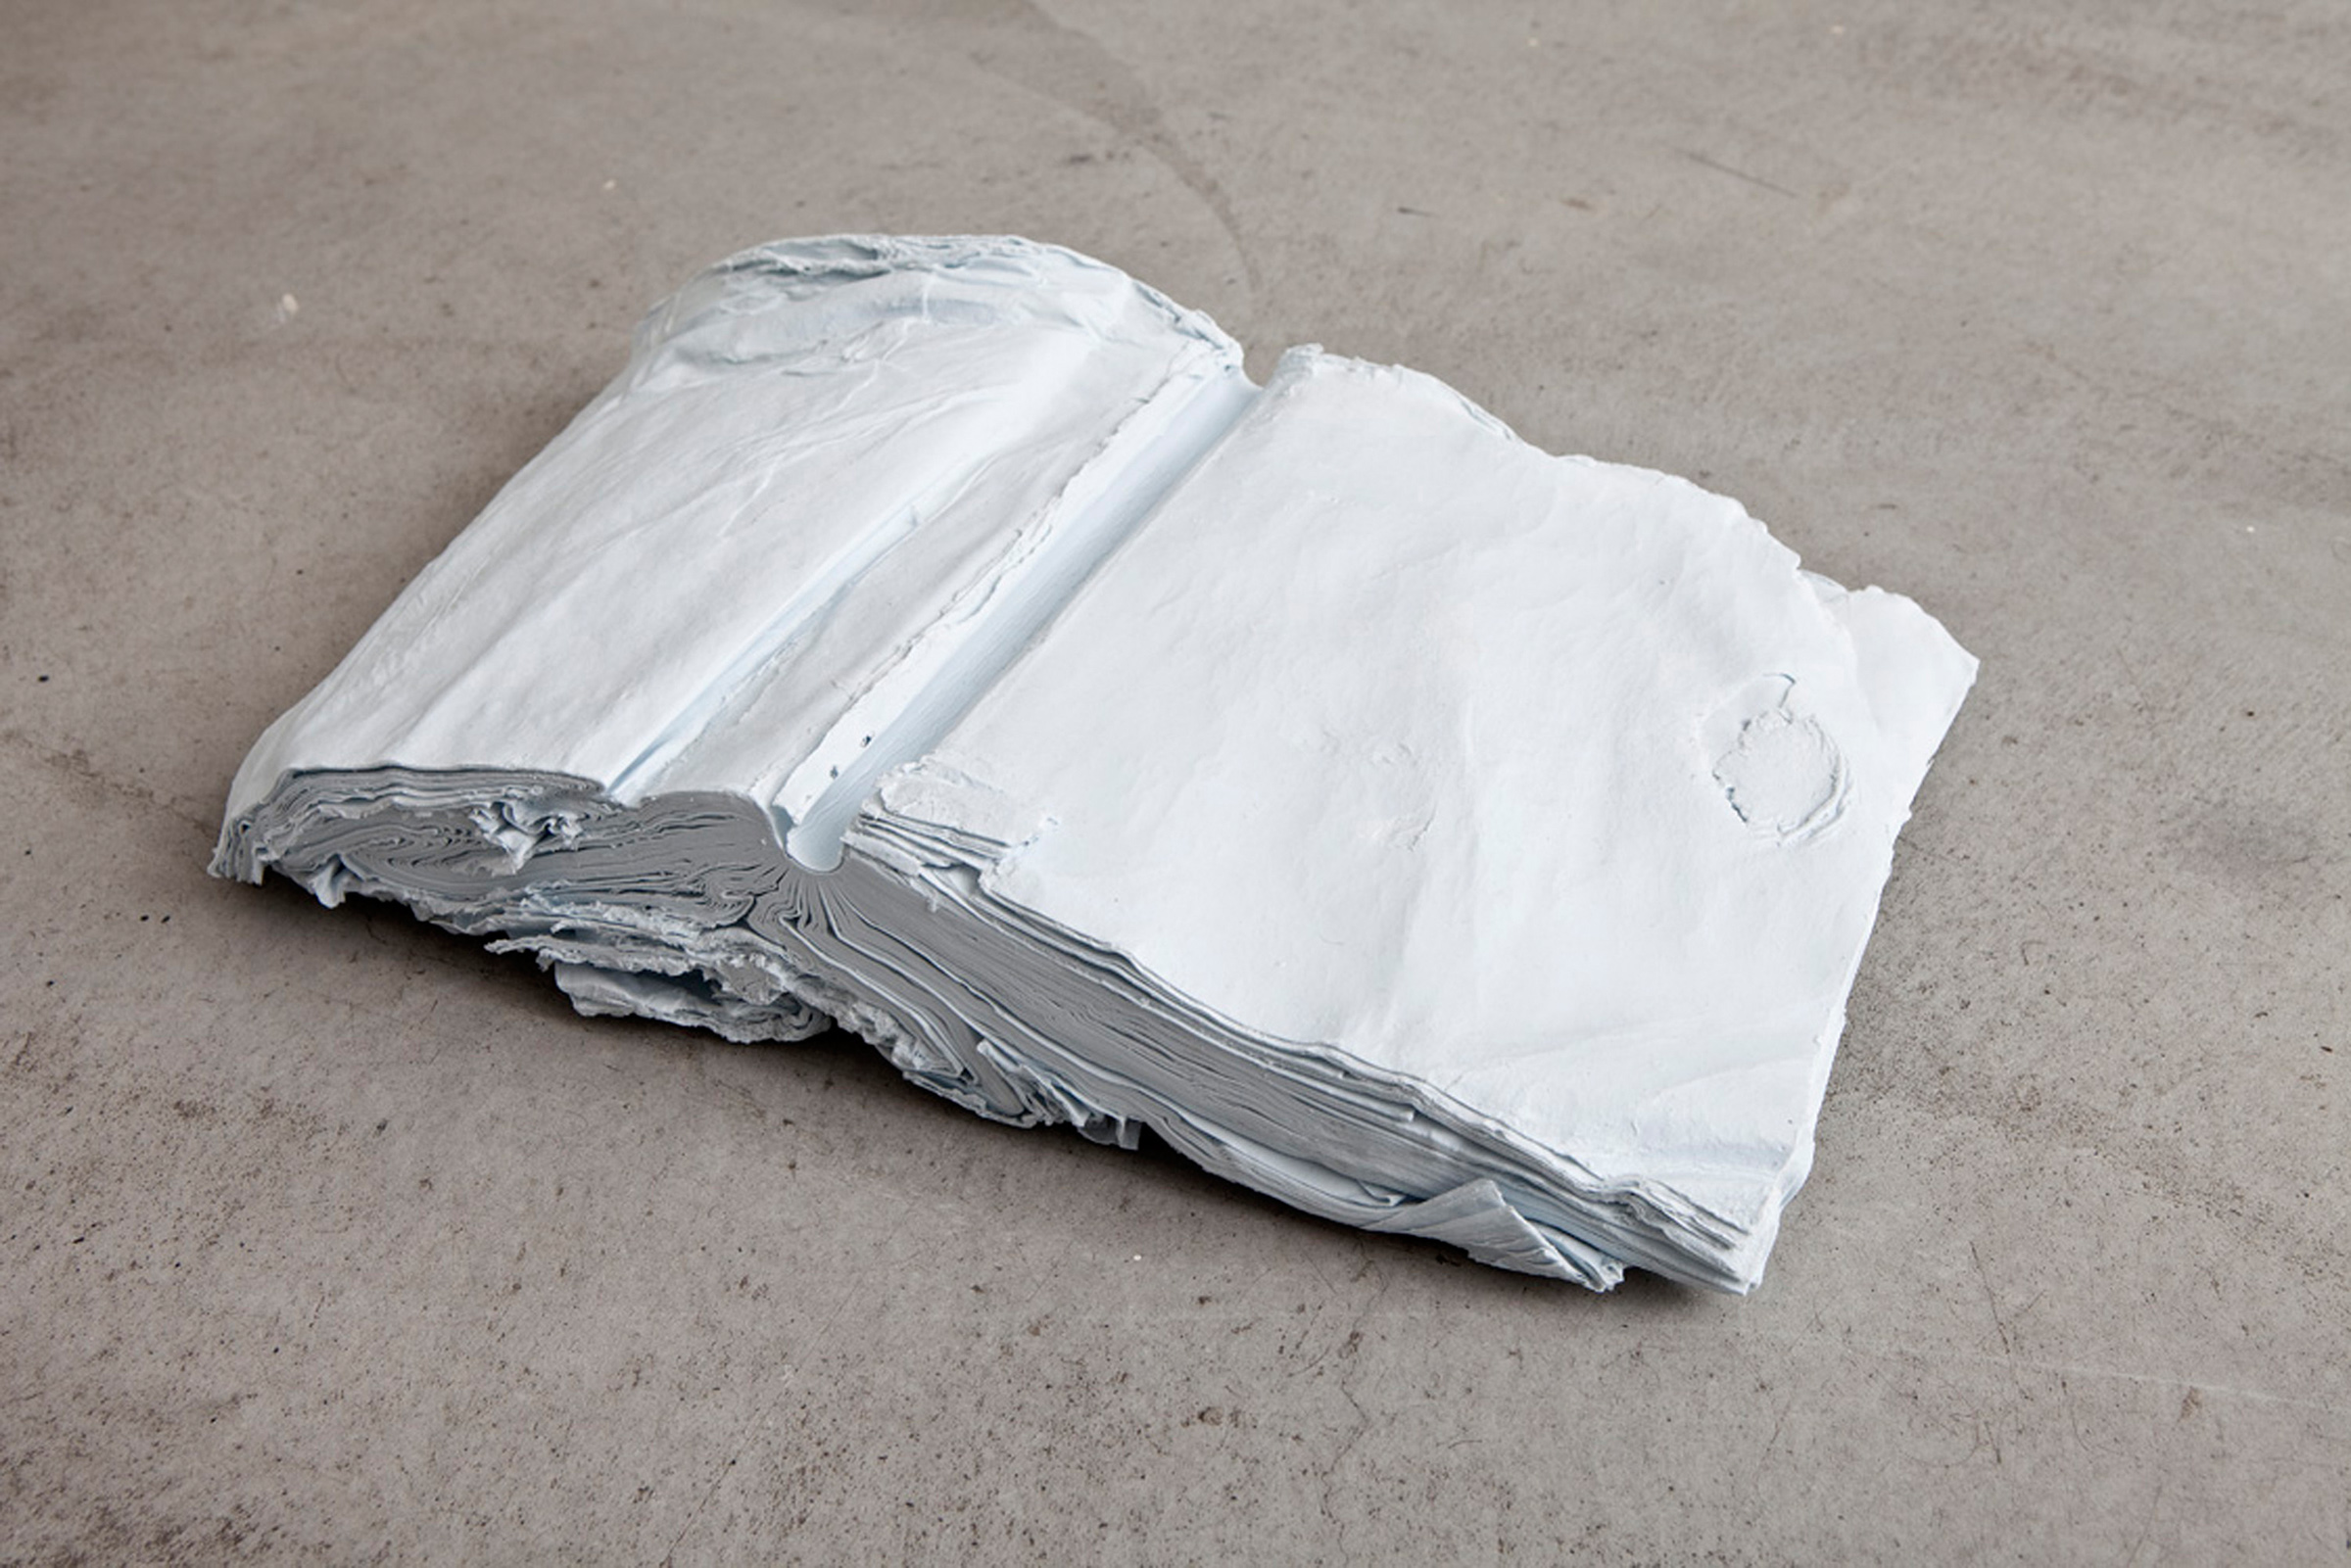 Nathaniel Robinson, Free Information, 2010, pigmented polyurethane resin, 3.25h x 16.75w x 11.25d in.